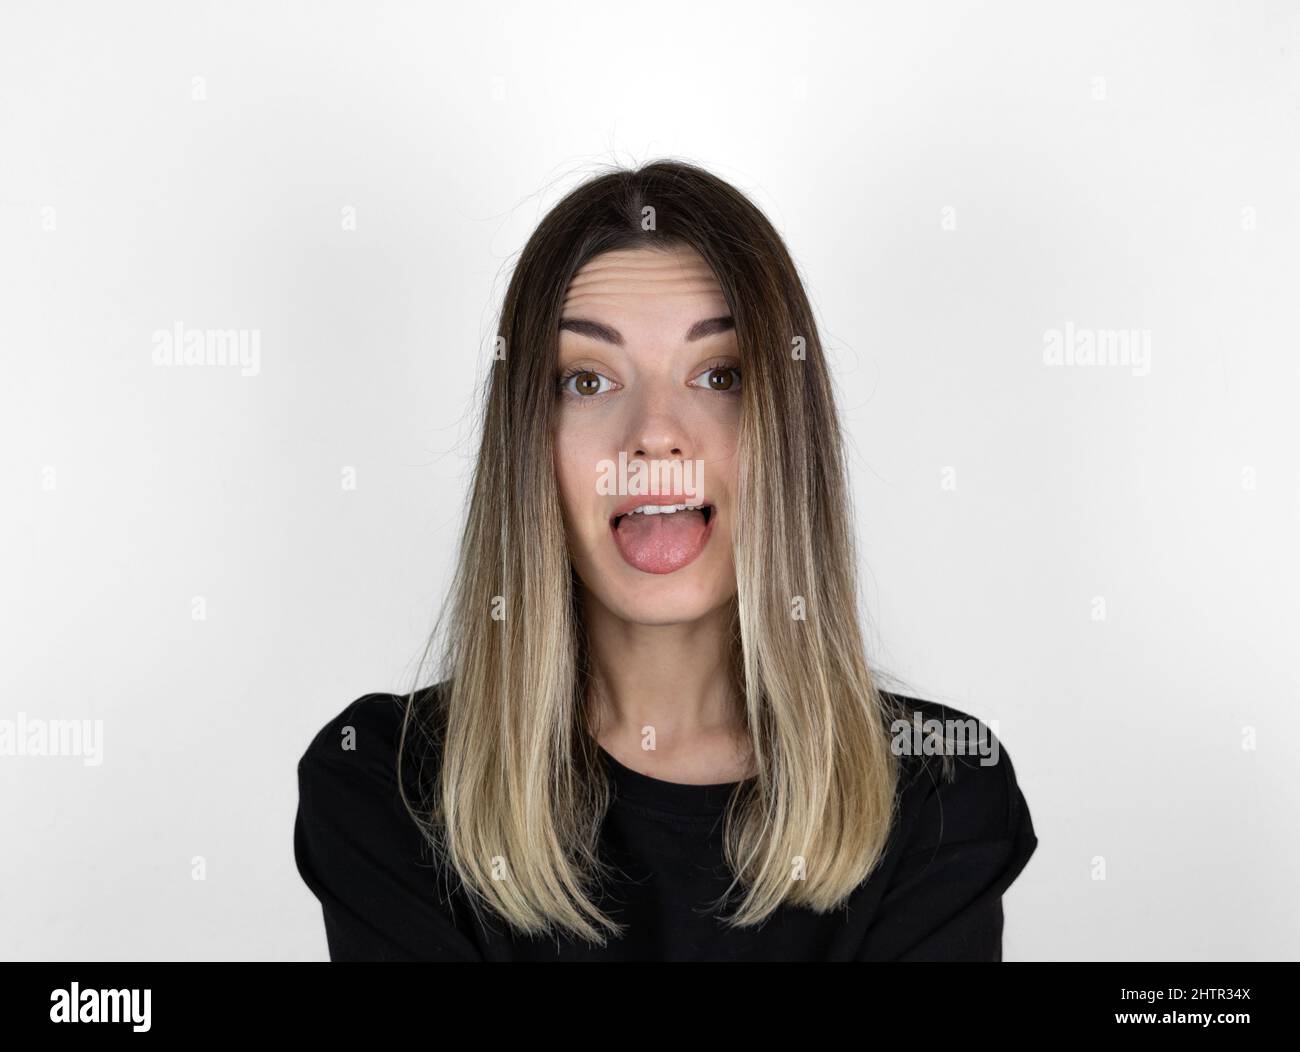 Young woman sticking out tounge, close up portrait. Teasing you through camera while isolated with white background. Stock Photo